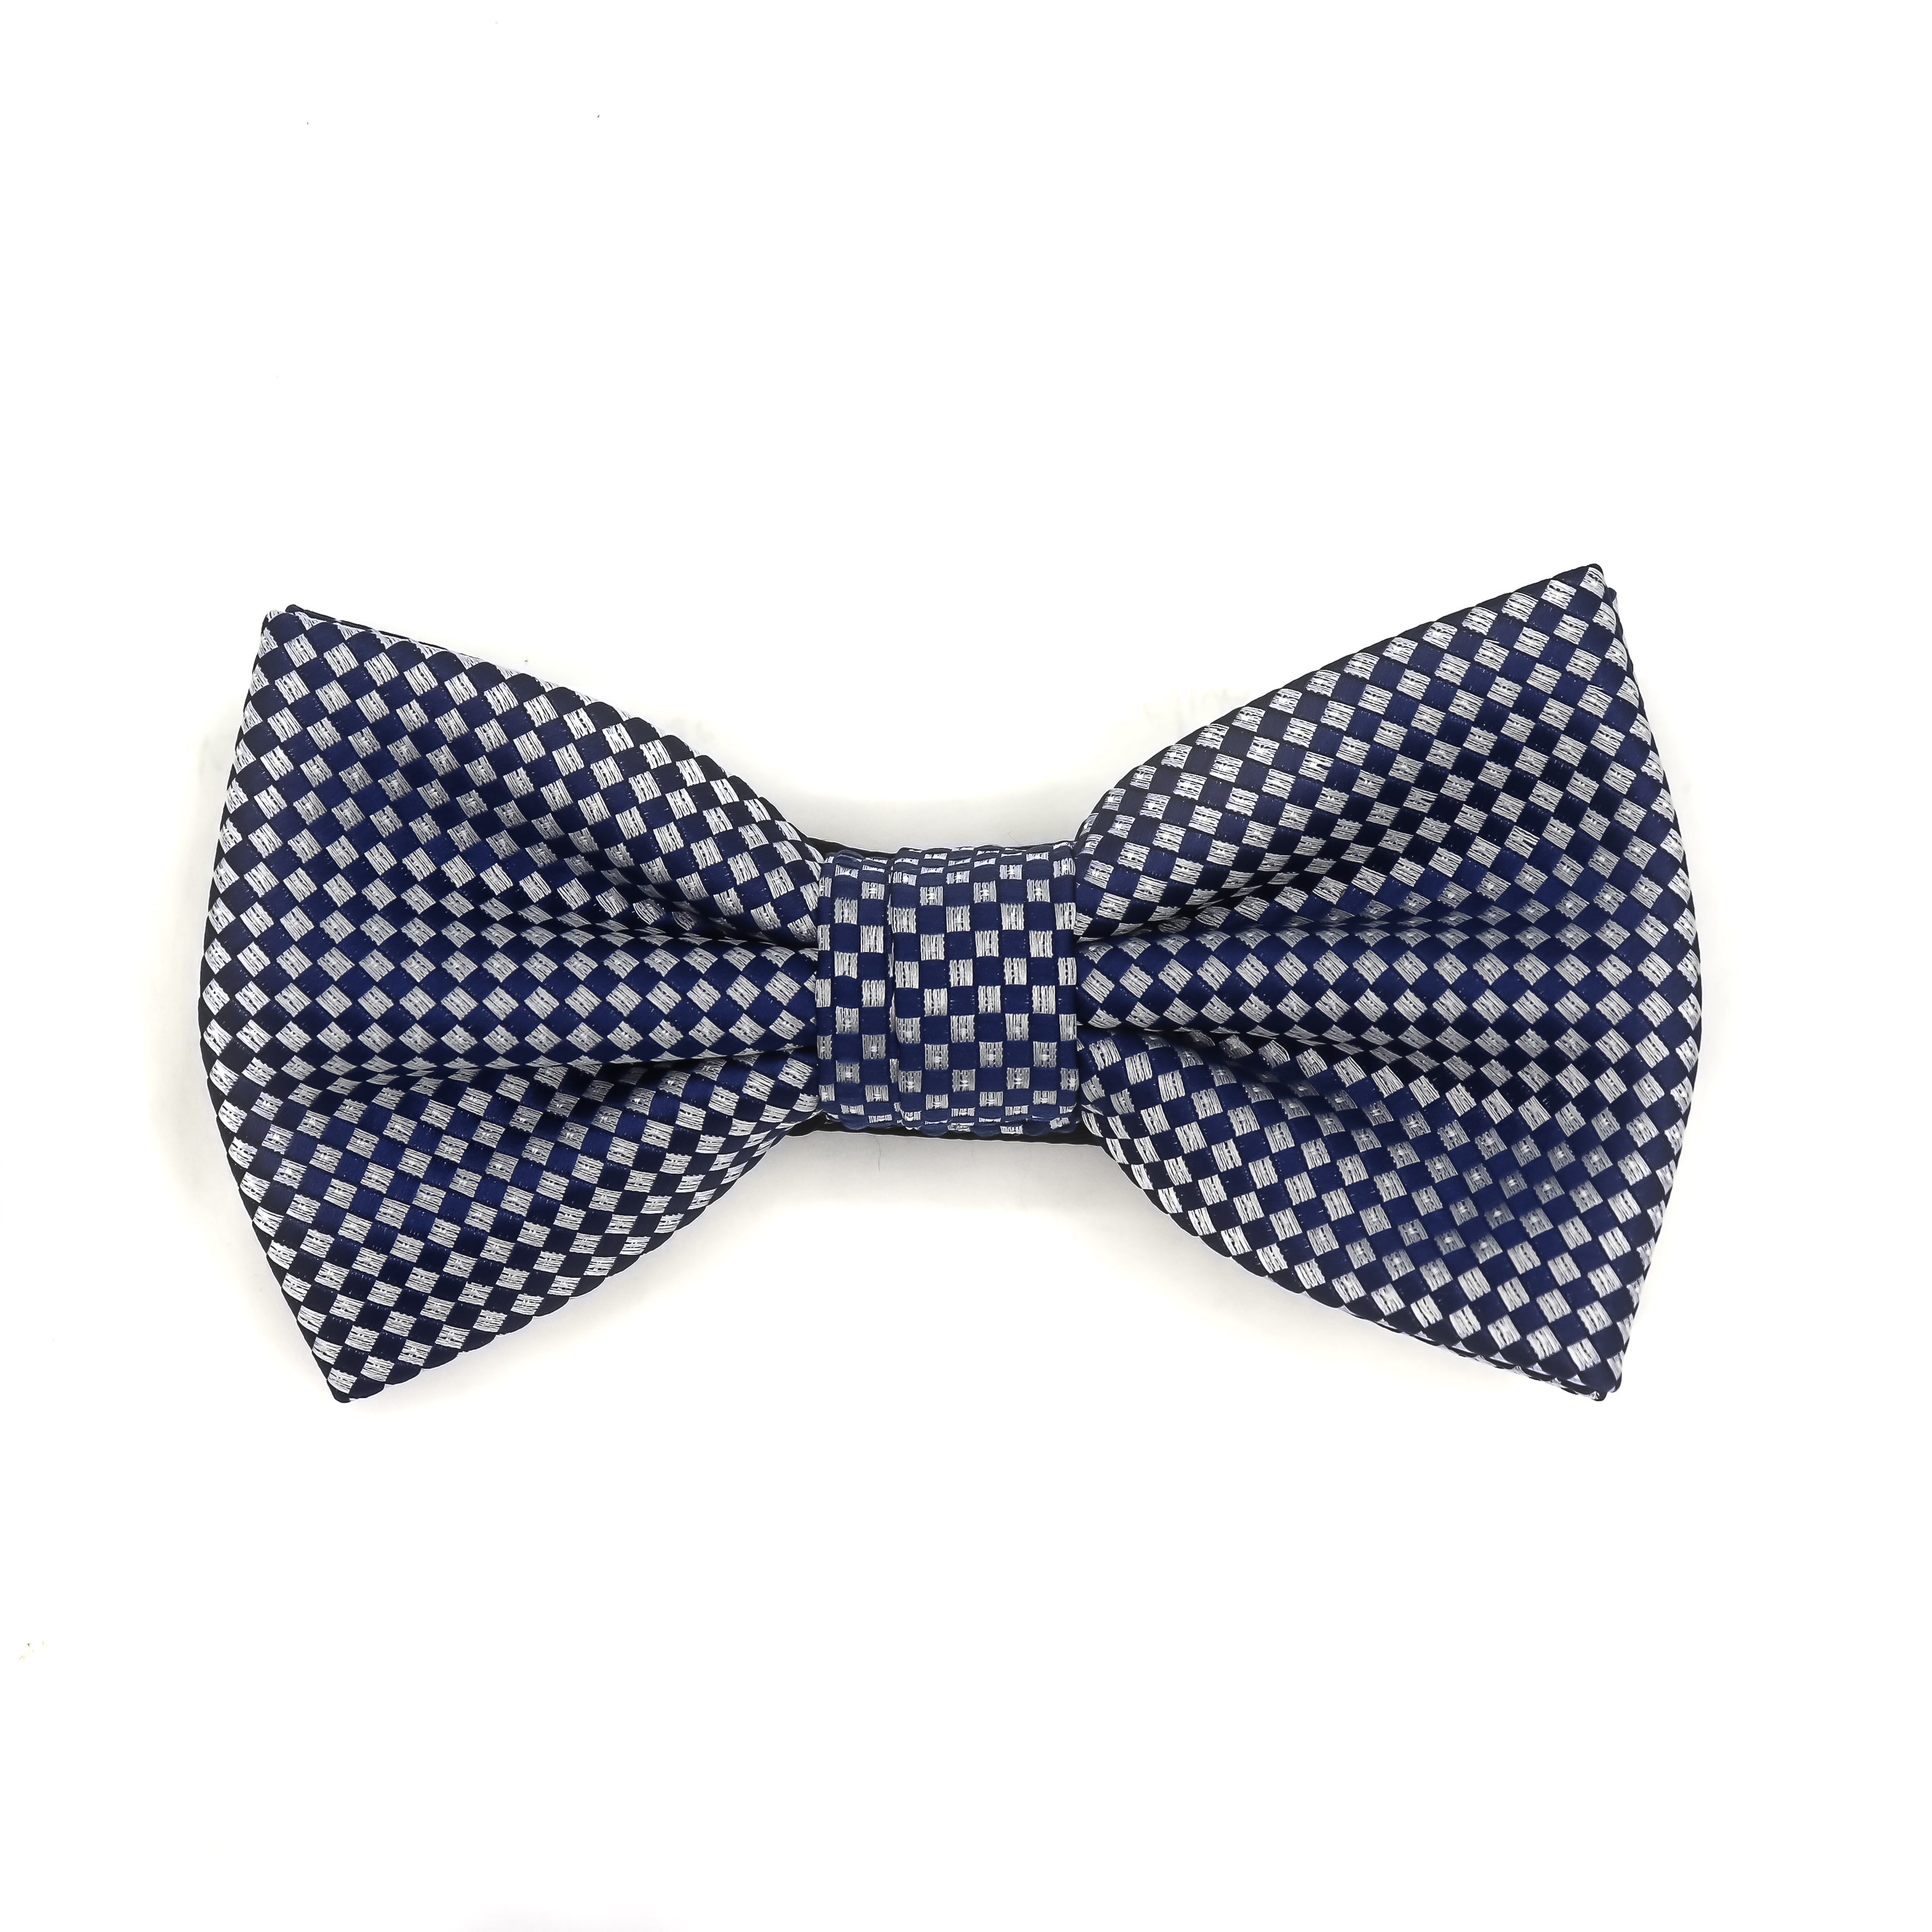 Modern Yet Classic Bow Tie